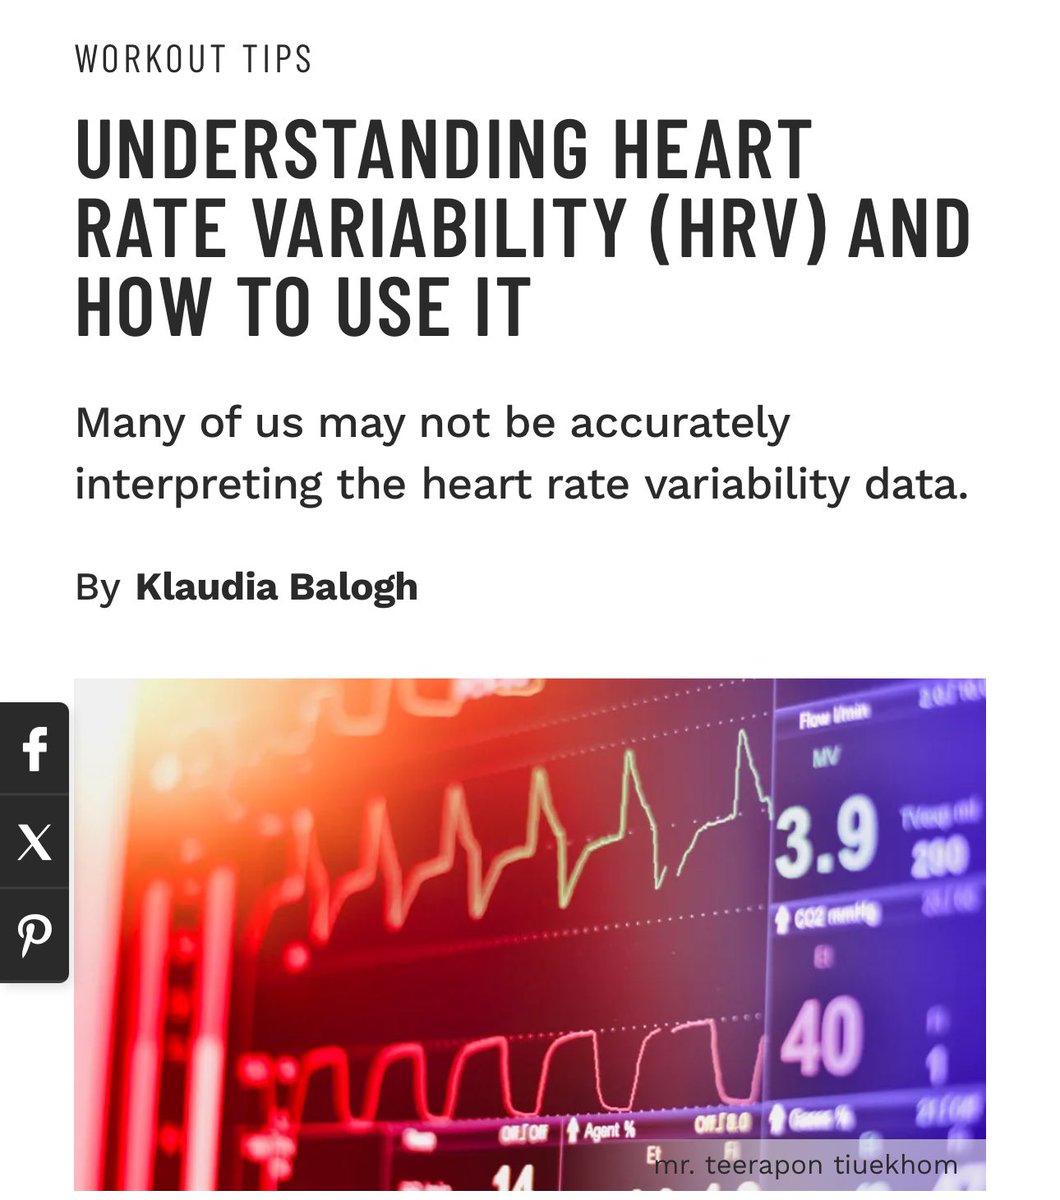 UNDERSTANDING HEART RATE VARIABILITY (HRV) AND HOW TO USE IT Many of us may not be accurately interpreting the heart rate variability data. By Klaudia Balogh Read Article: muscleandfitness.com #bodyhealth #cardio #experttips #fitnesstips #healthbenefits #healthstudies…